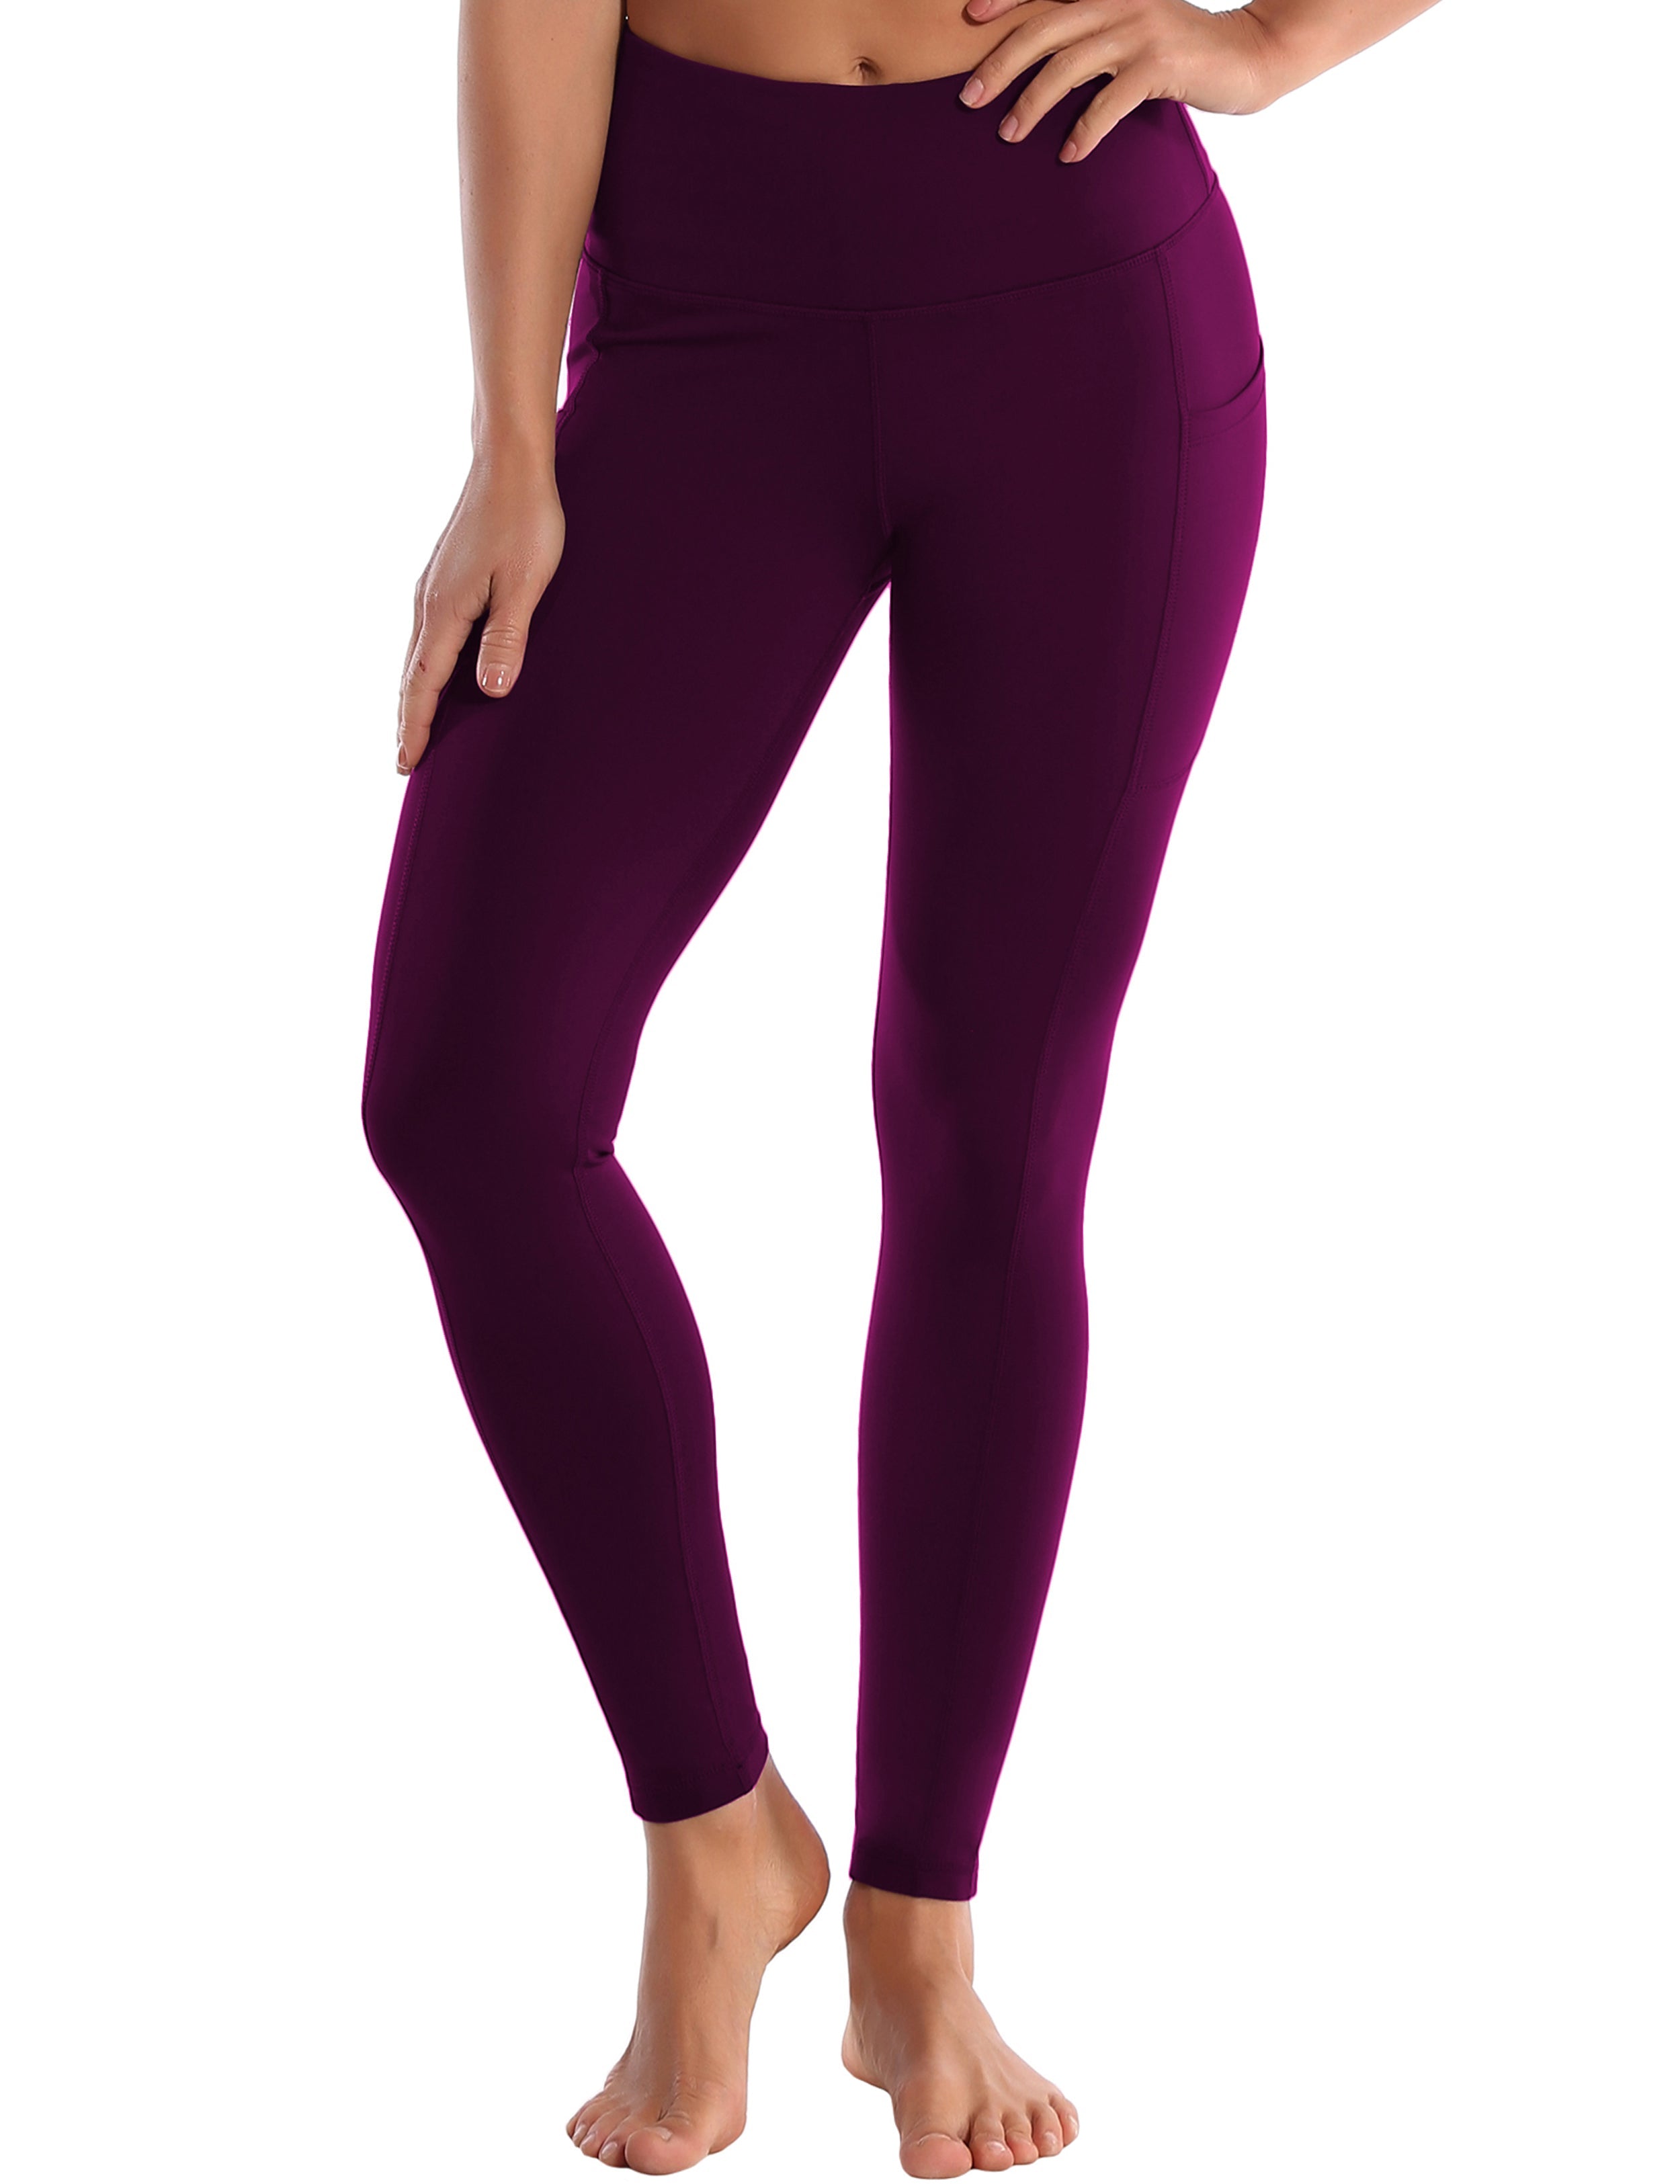 Hip Line Side Pockets Biking Pants plum Sexy Hip Line Side Pockets 75%Nylon/25%Spandex Fabric doesn't attract lint easily 4-way stretch No see-through Moisture-wicking Tummy control Inner pocket Two lengths